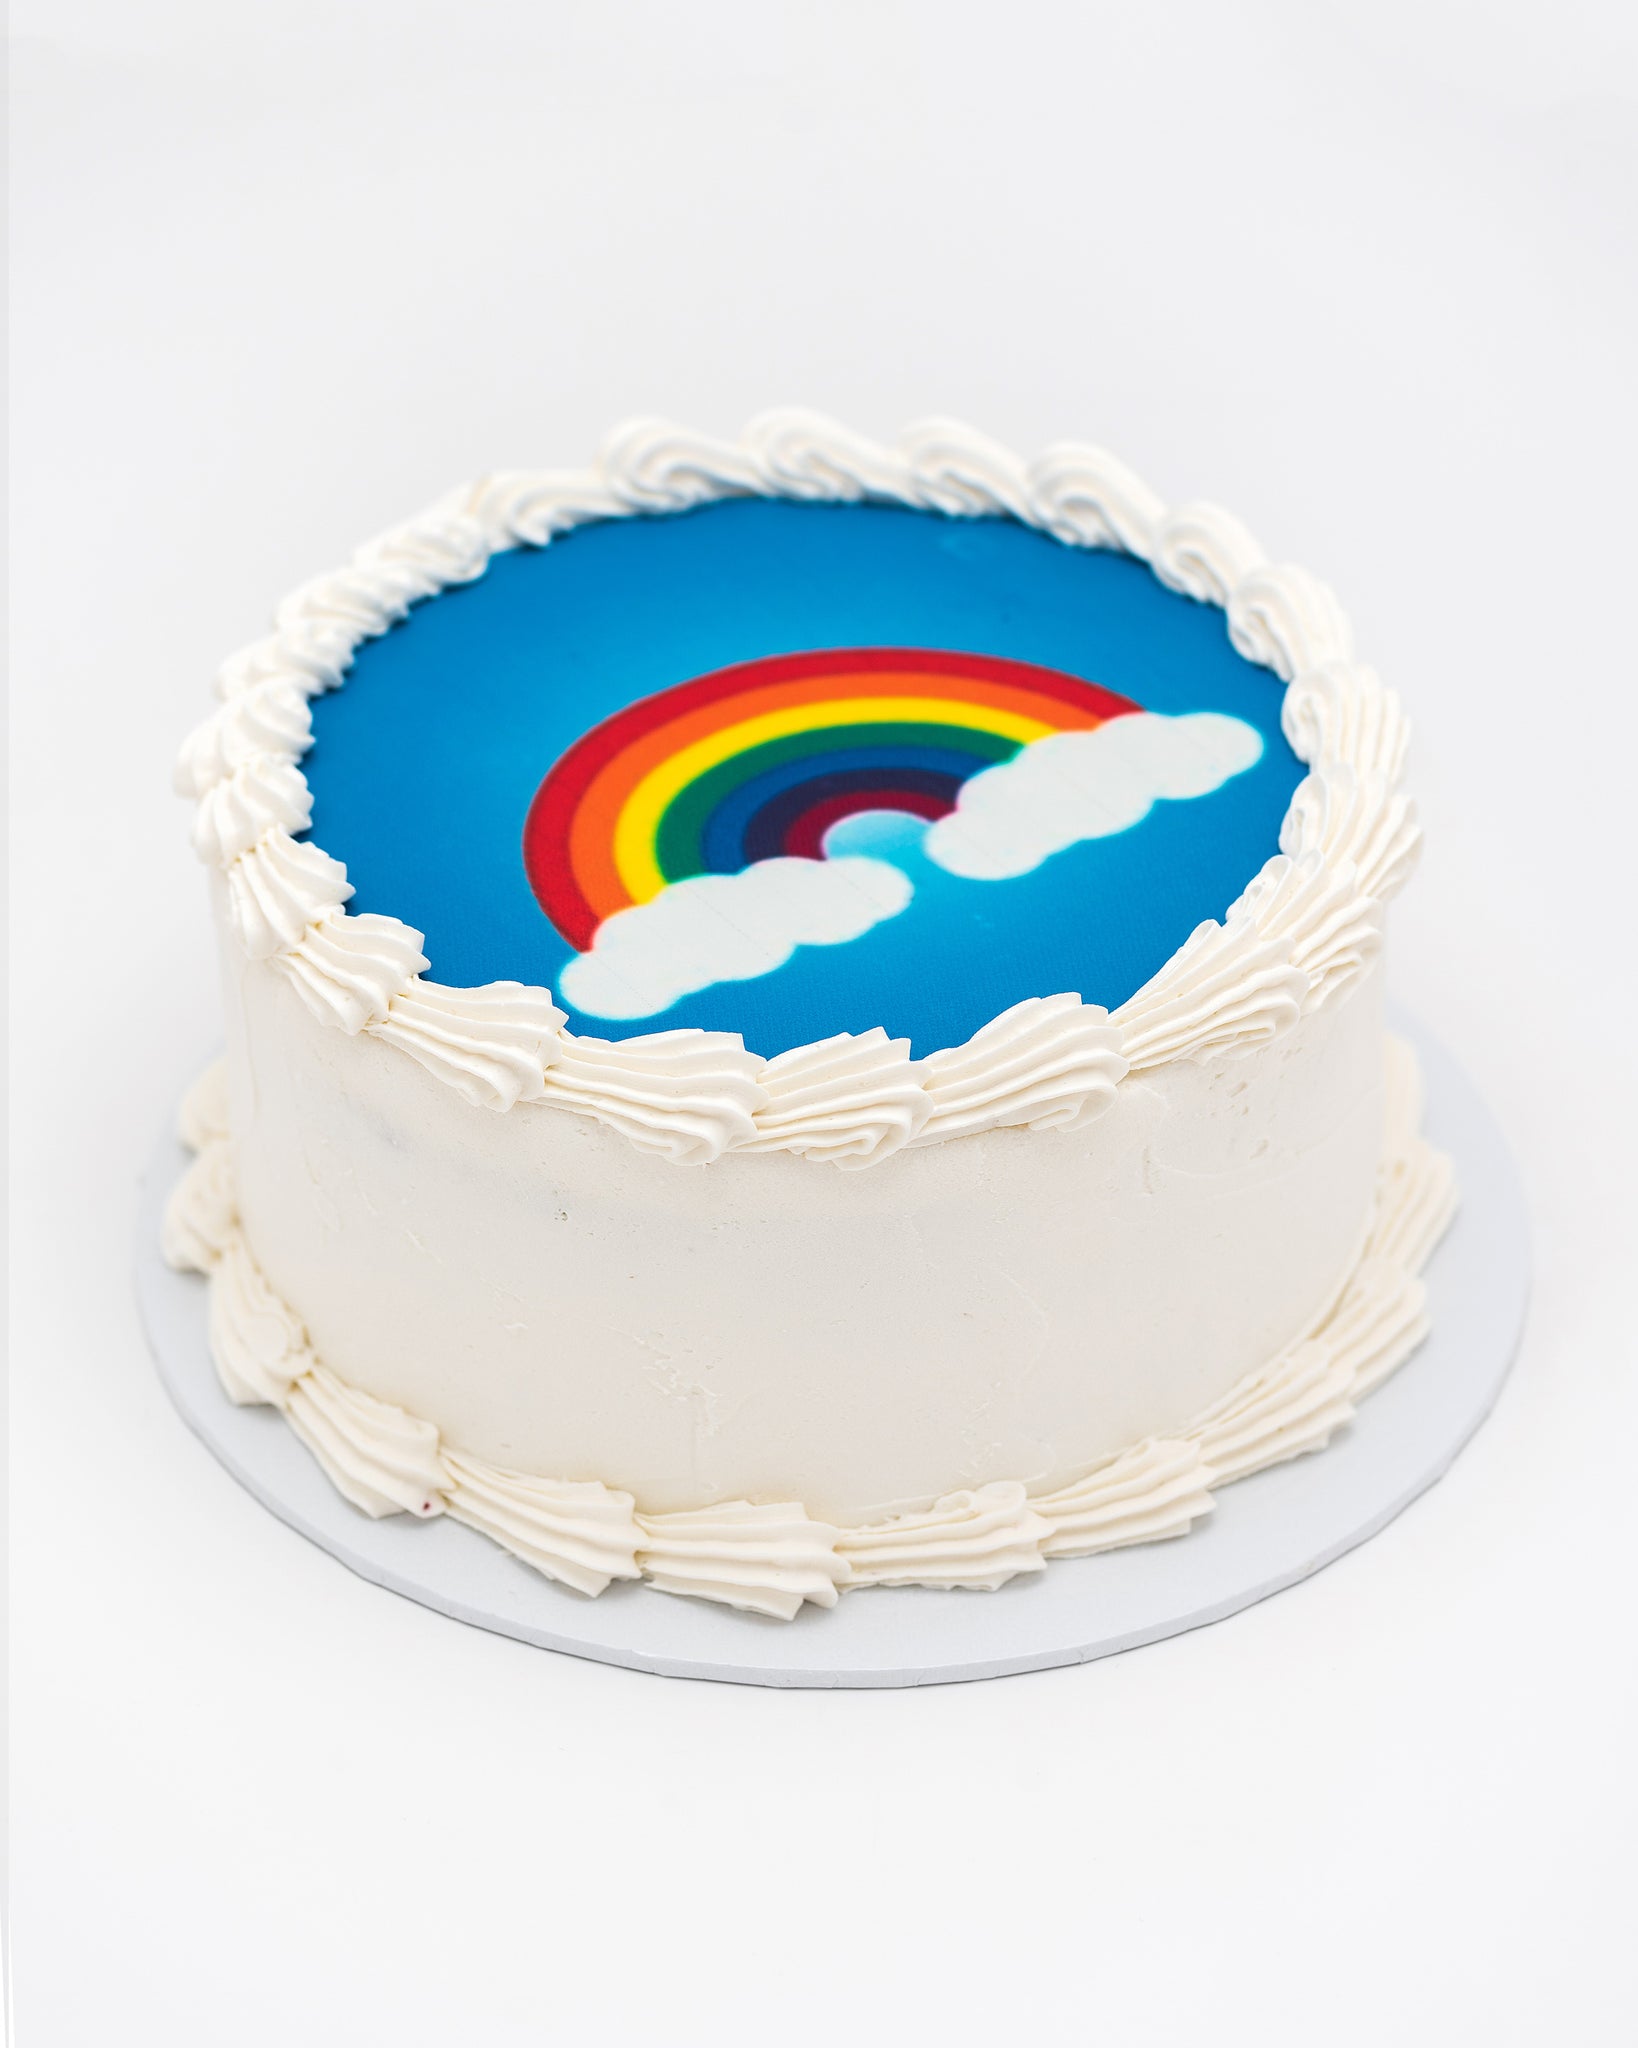 How To Print Edible Images For Cakes | Buy Edible Frosting Sheets Online